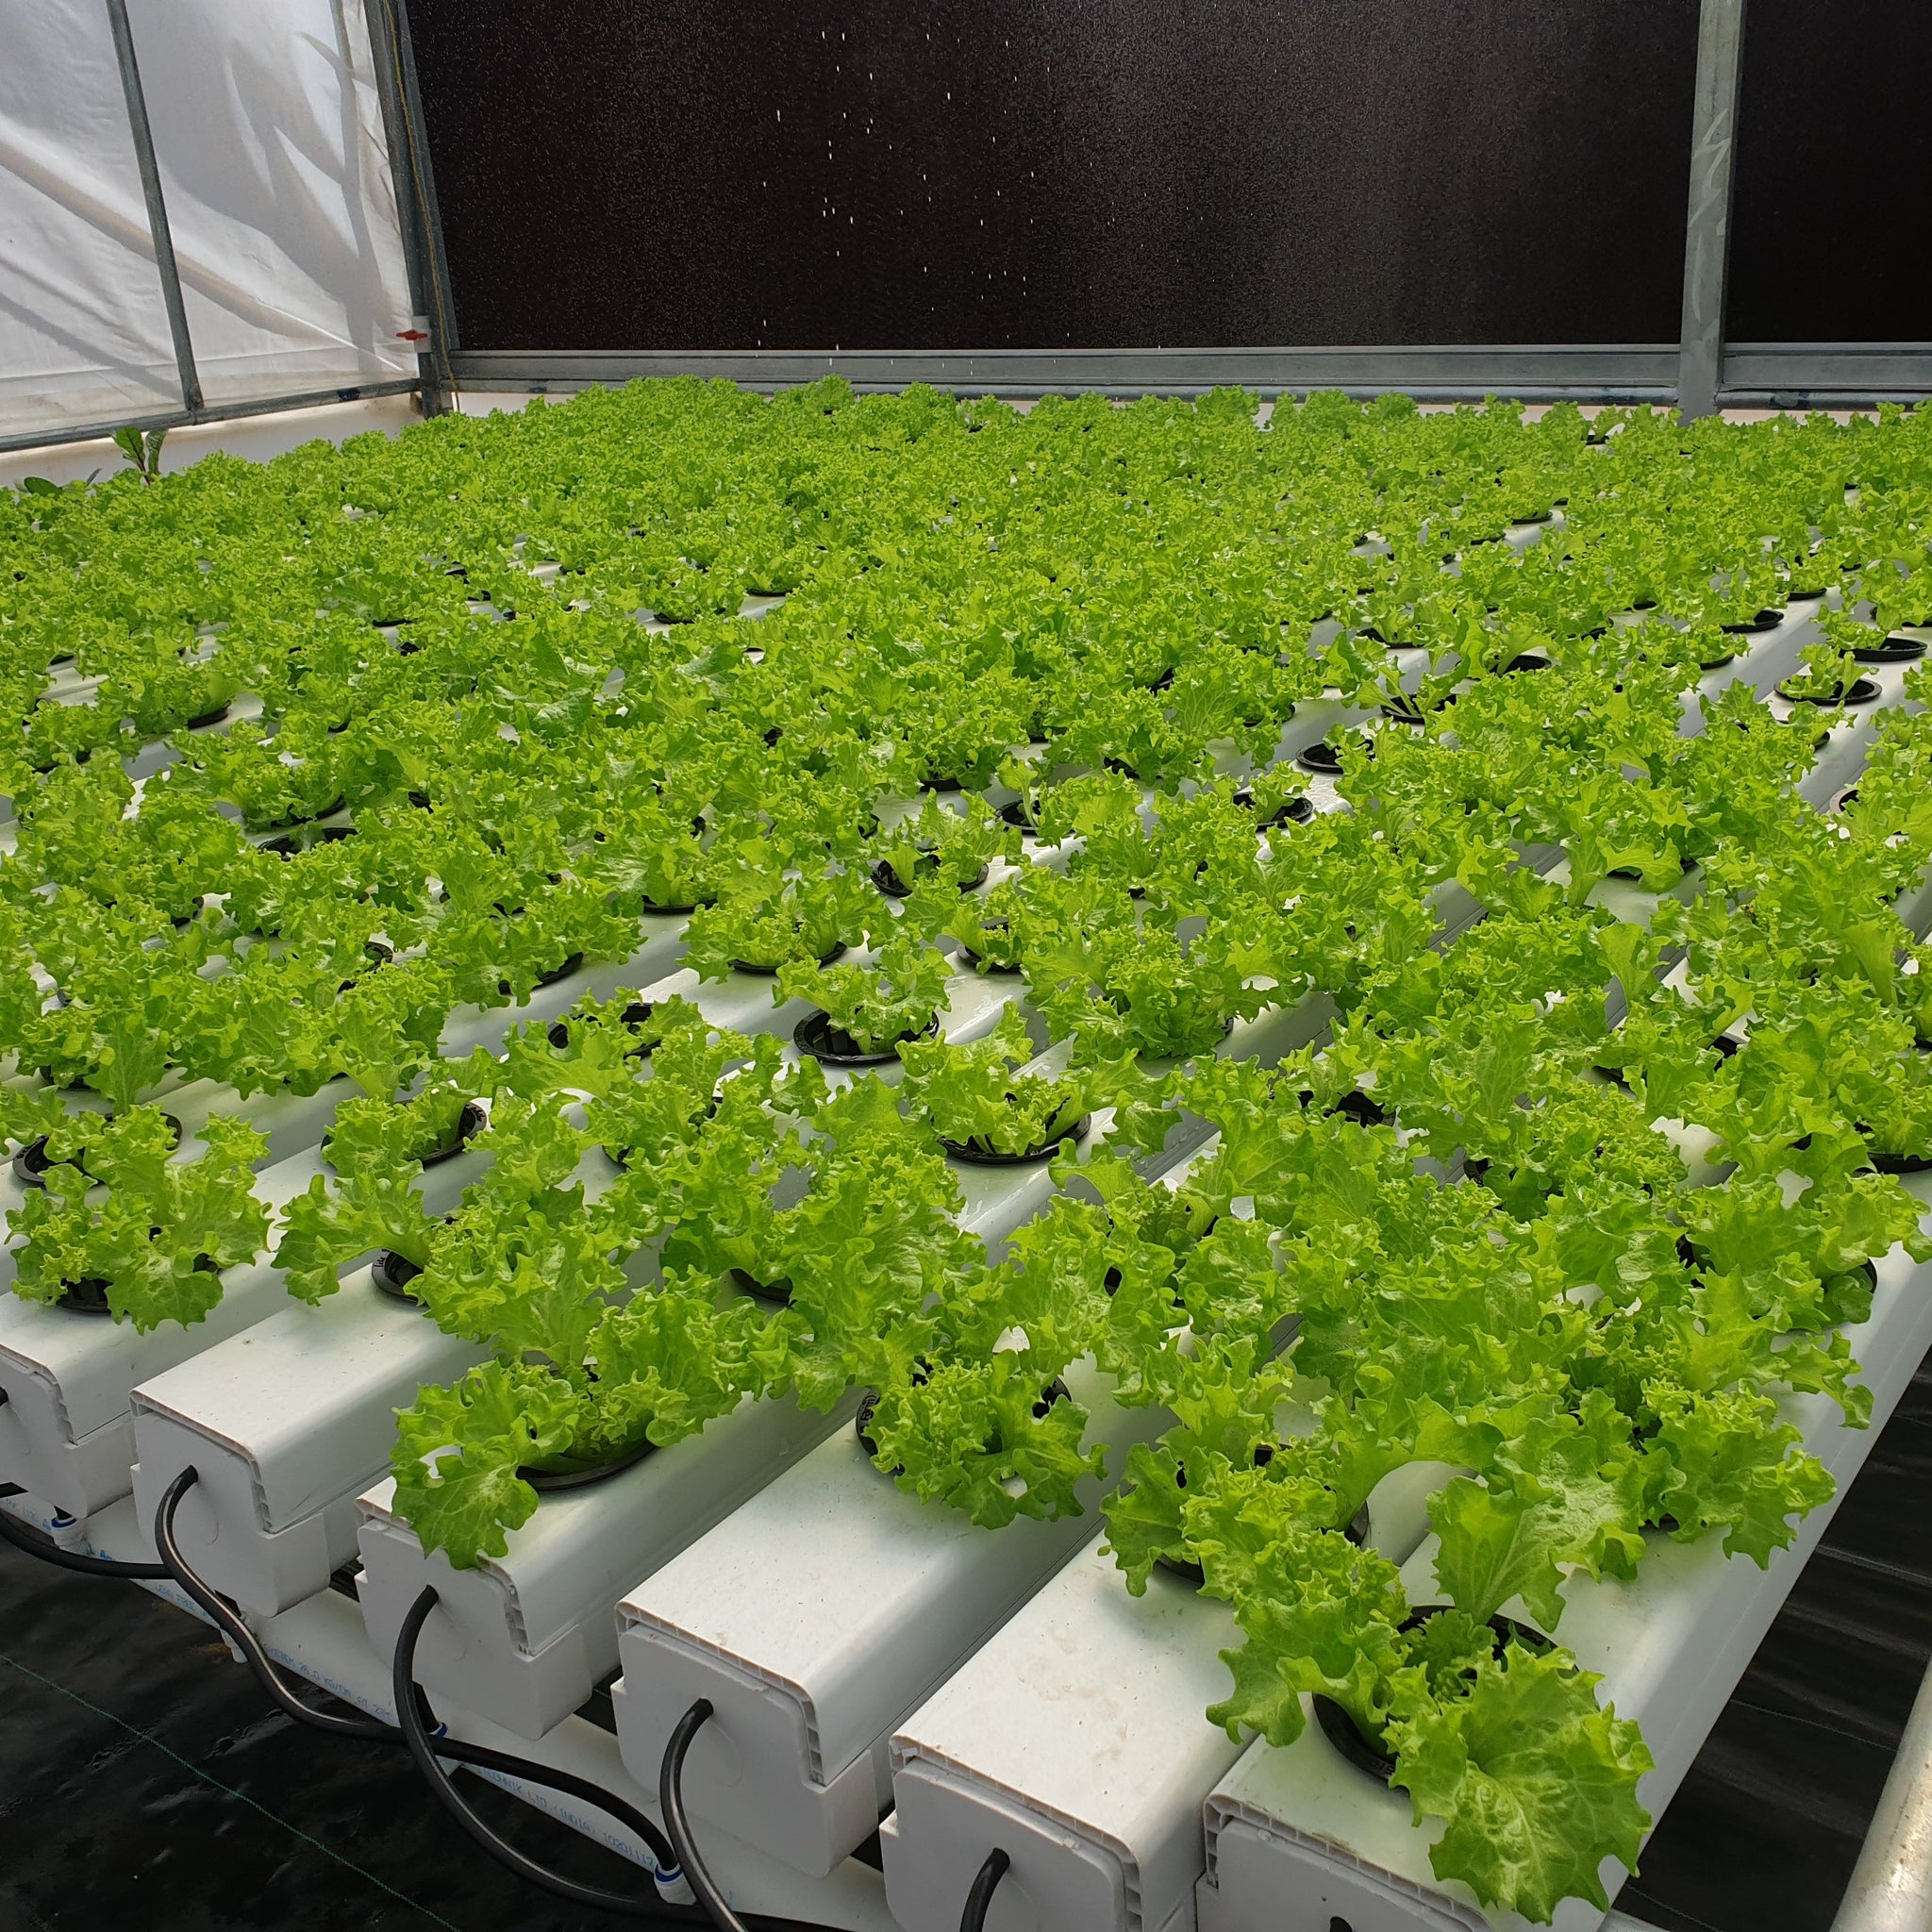 6 Reasons why hydroponics is healthier rather than soil